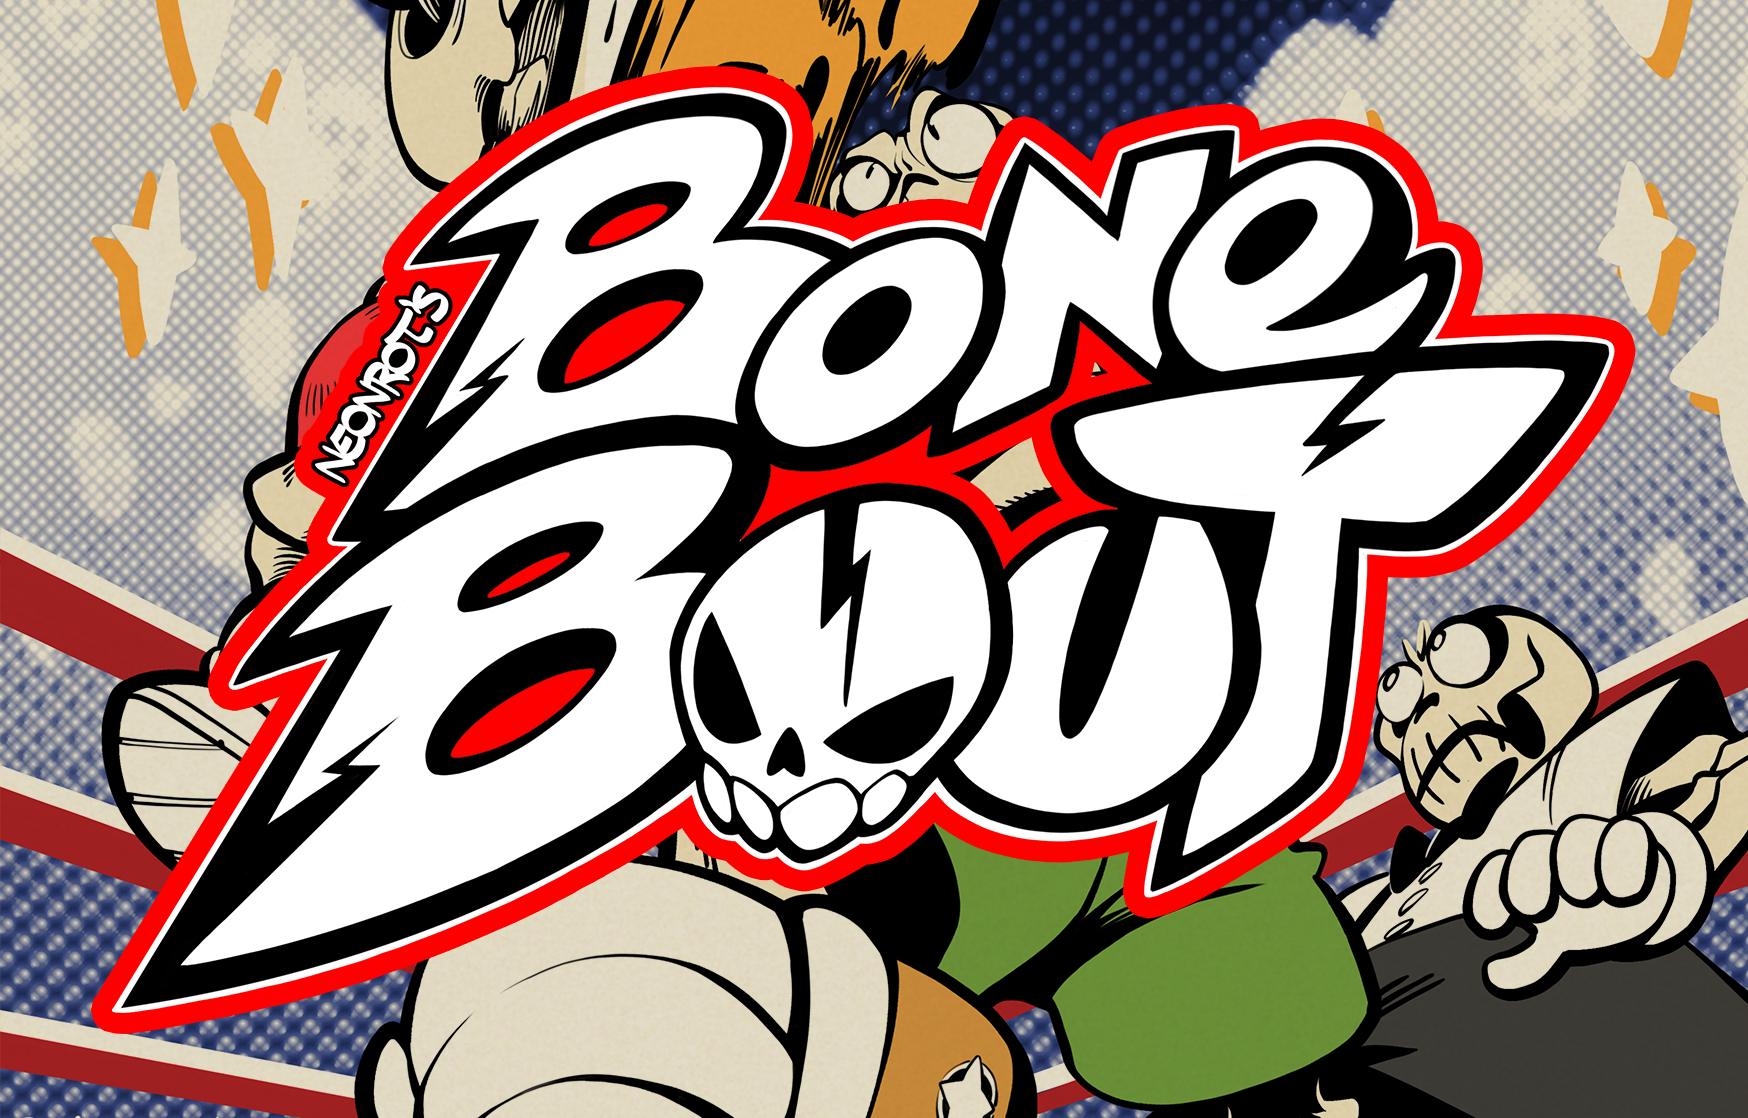 Bone Bout: A Game of Boxing Skeletons